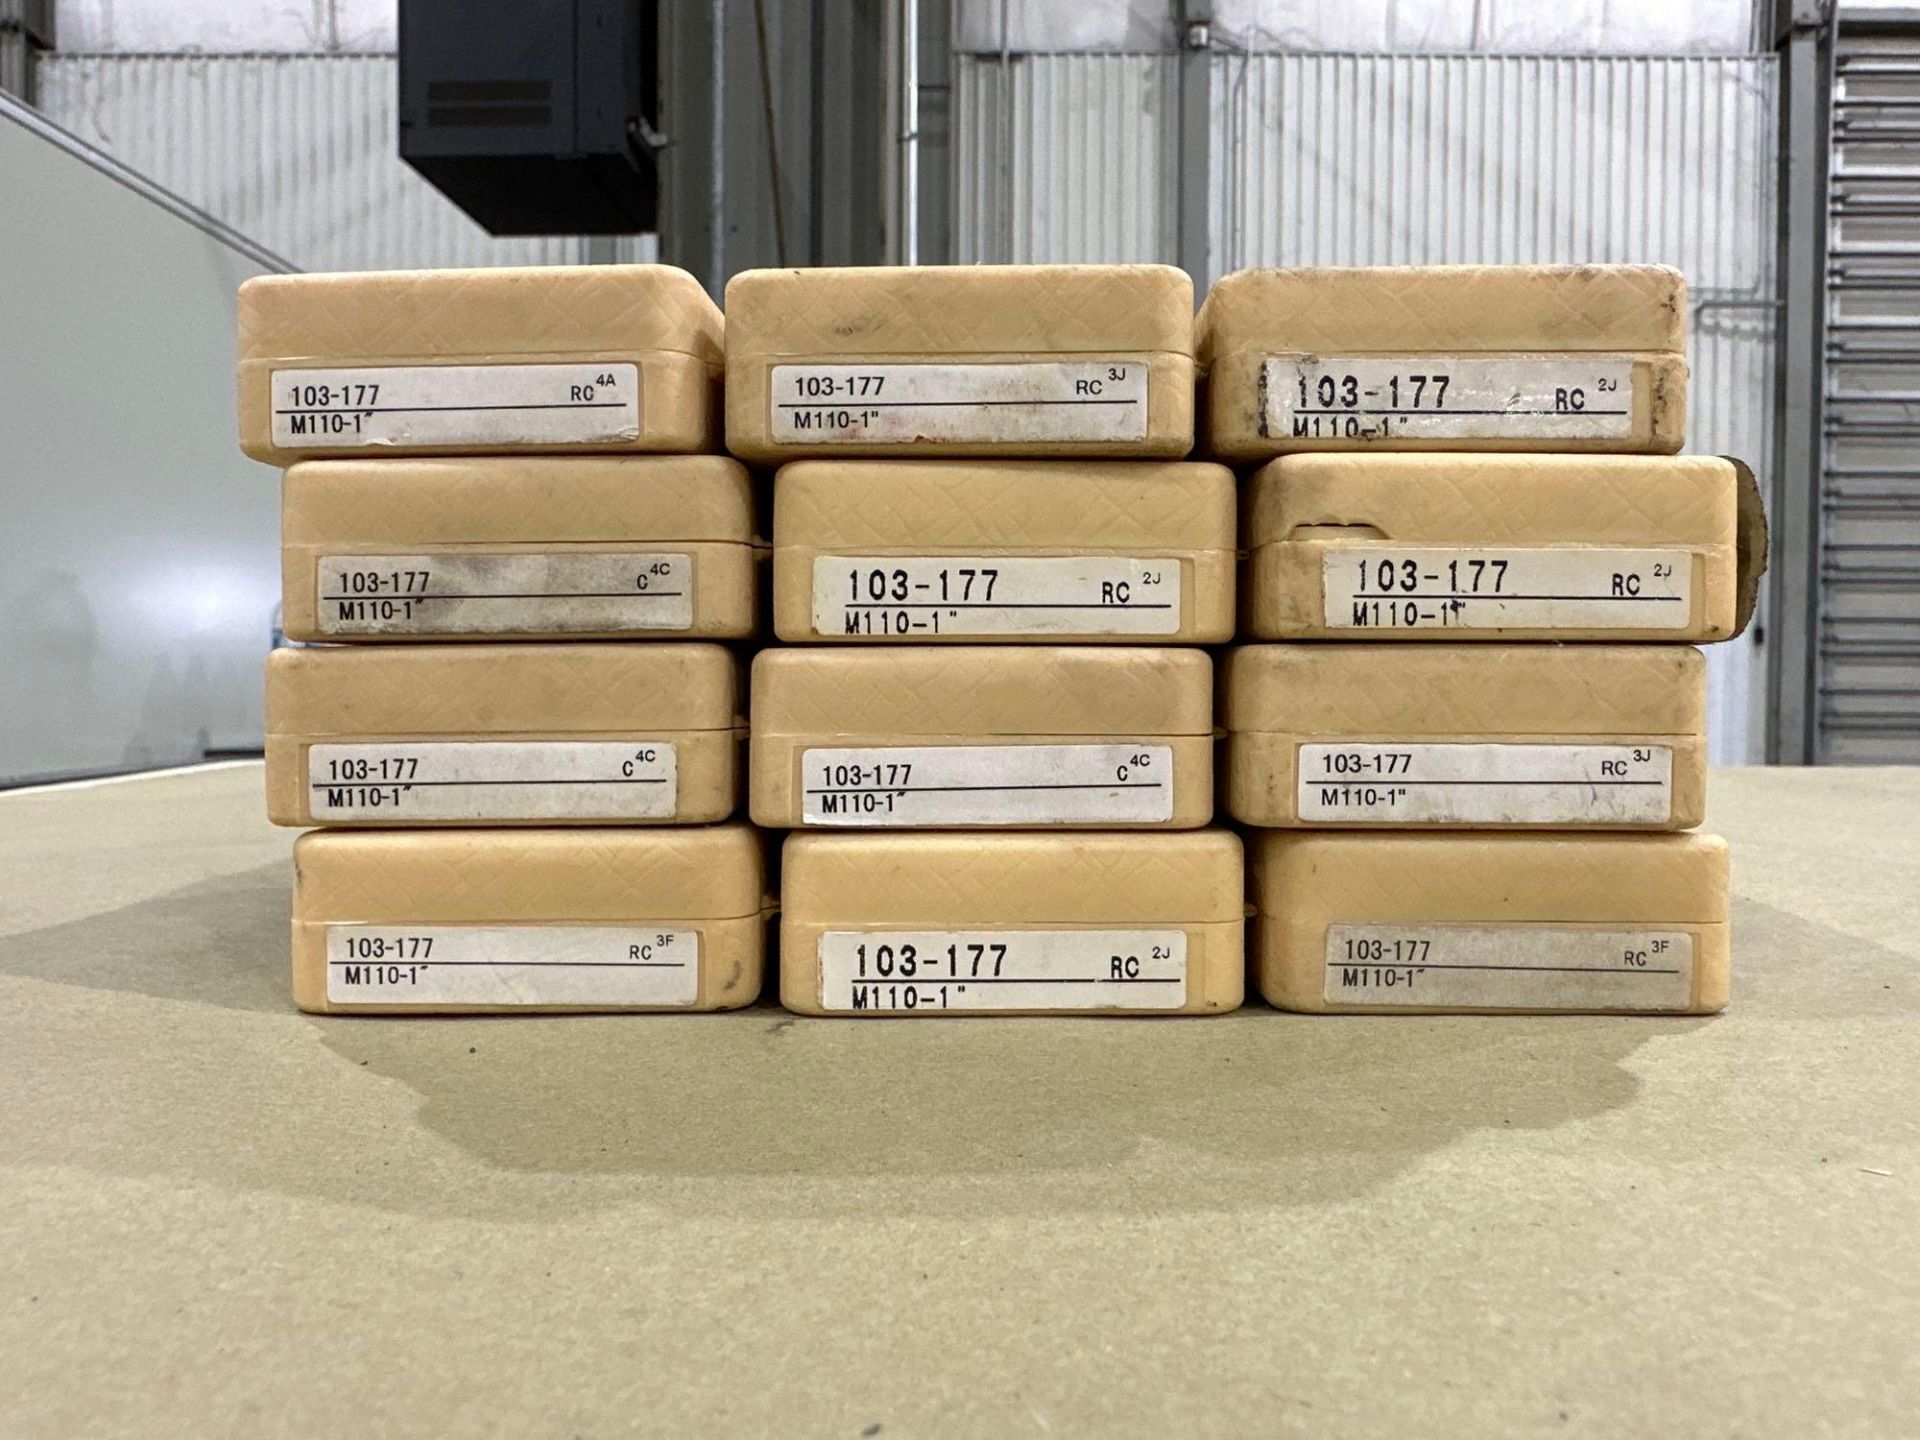 Lot of 12: Mitutoyo Mechanical OD Micrometer M110-1”, 0-1” Range, .001” Graduation, in plastic boxes - Image 3 of 7